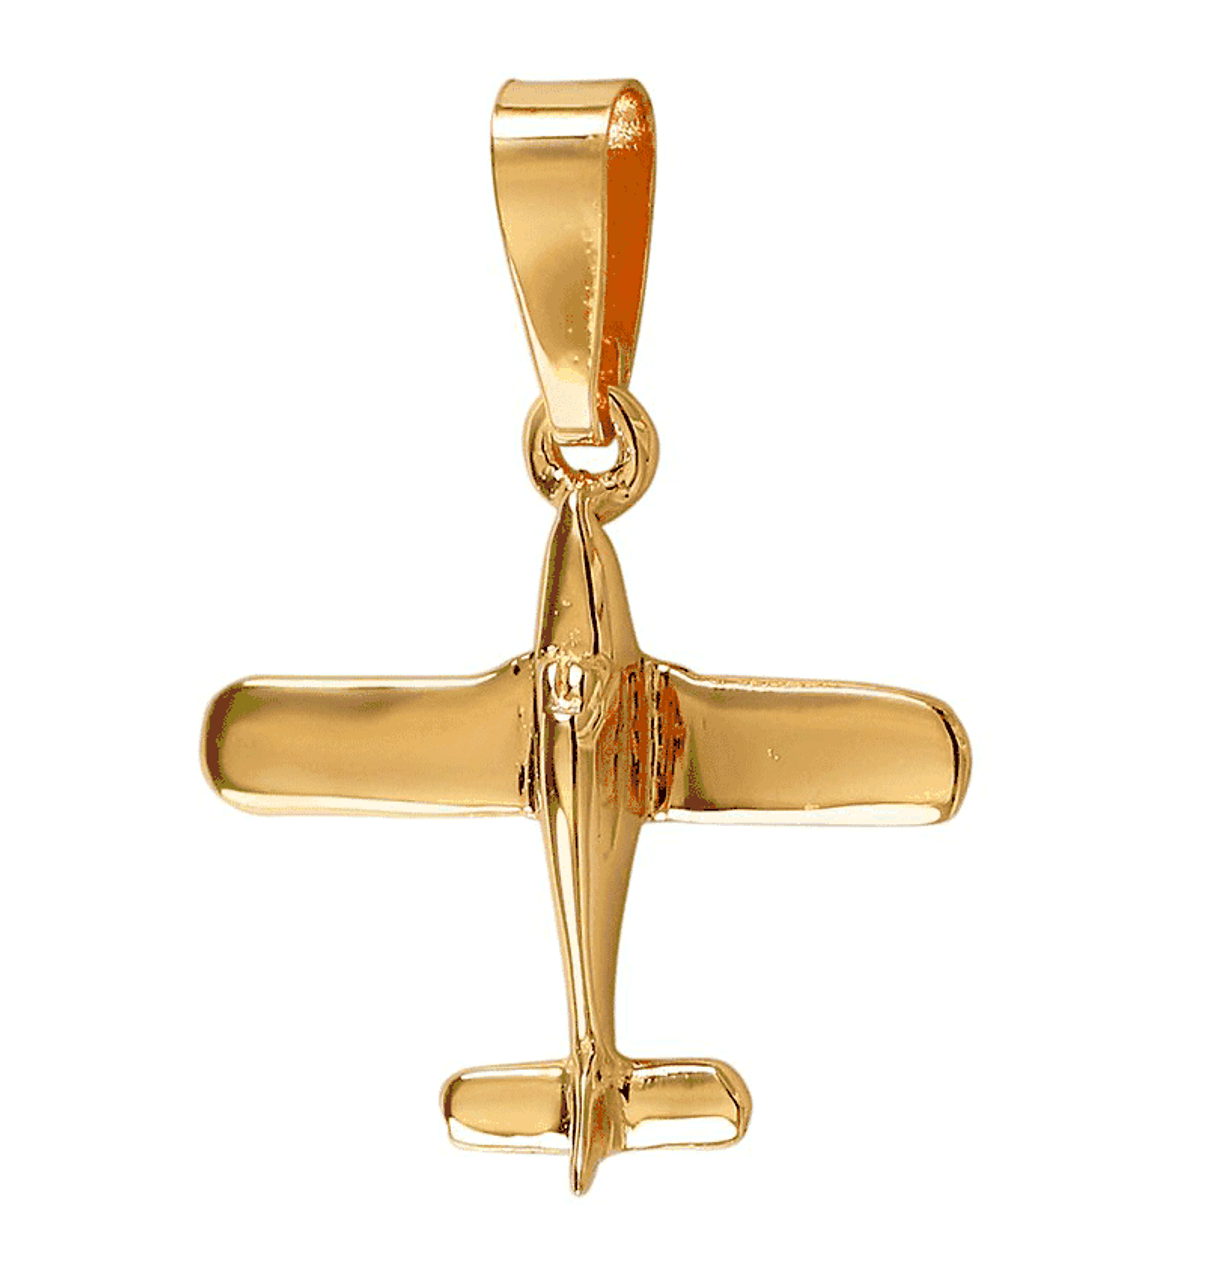 Aviation Jewelry, Gold Piper Style Airplane Pendant